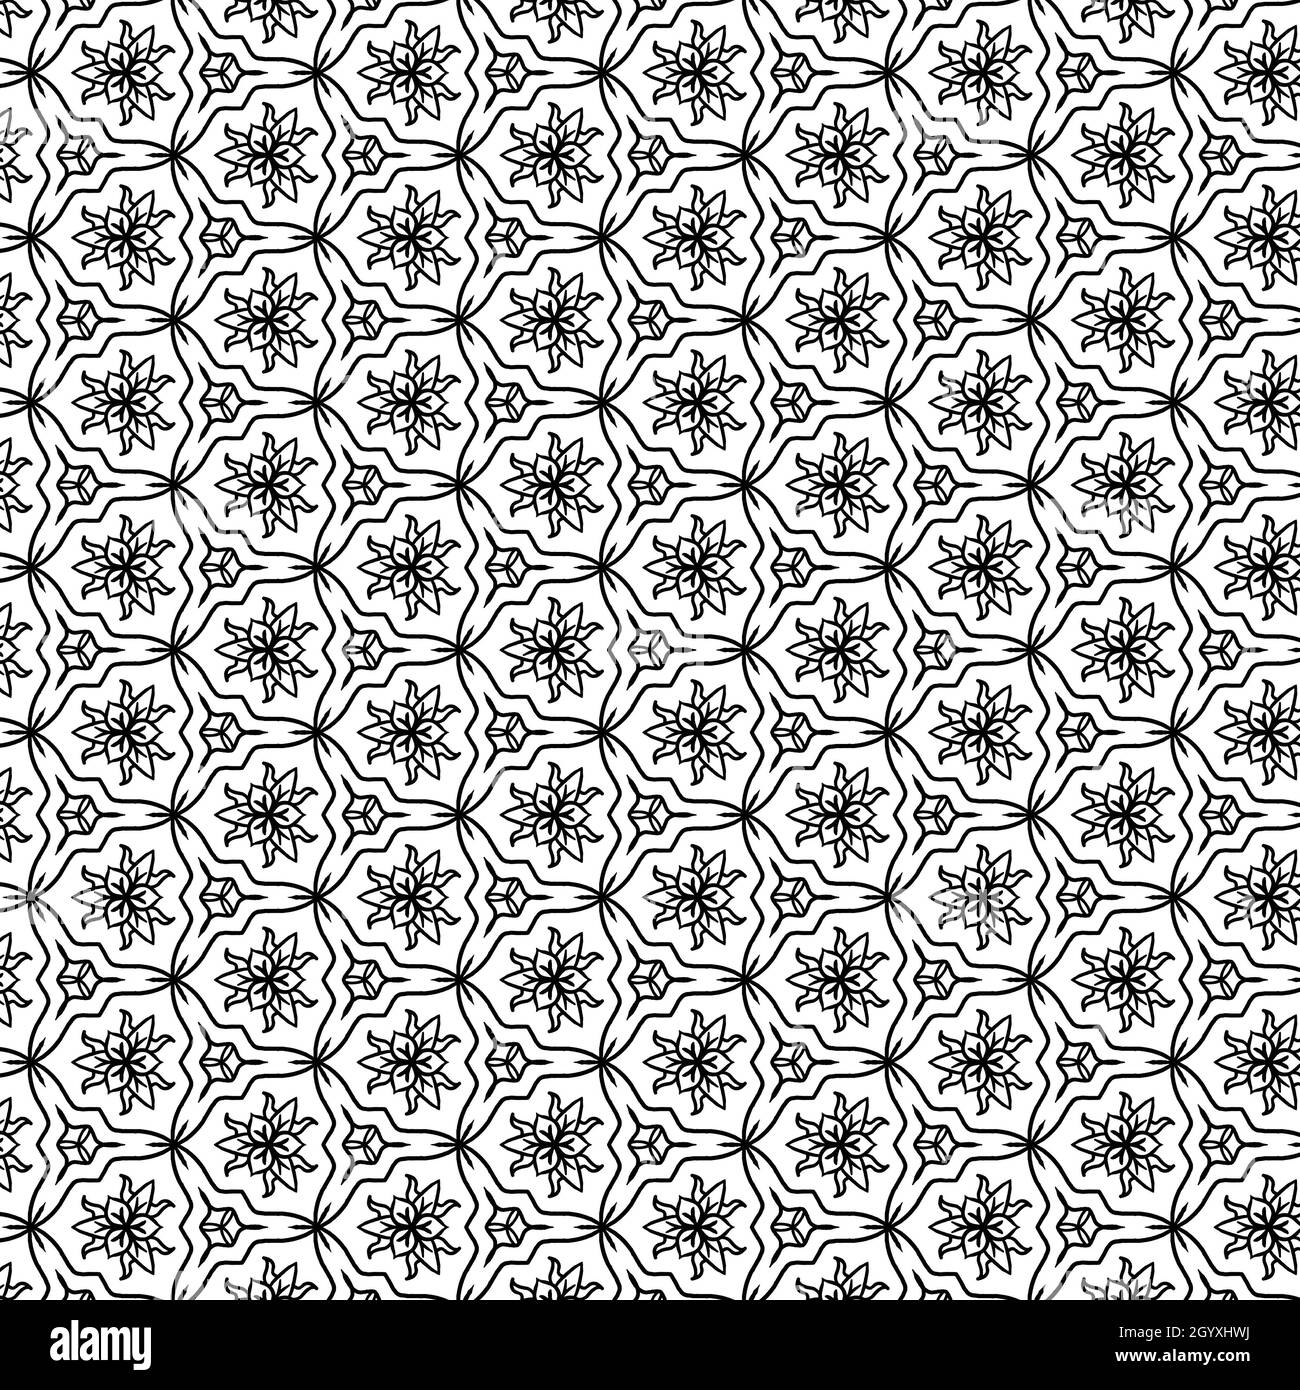 Seamless pattern, elegant black and white graphic design of flower for textile print, paper wrap, wallpaper, backdrop. Stock Photo